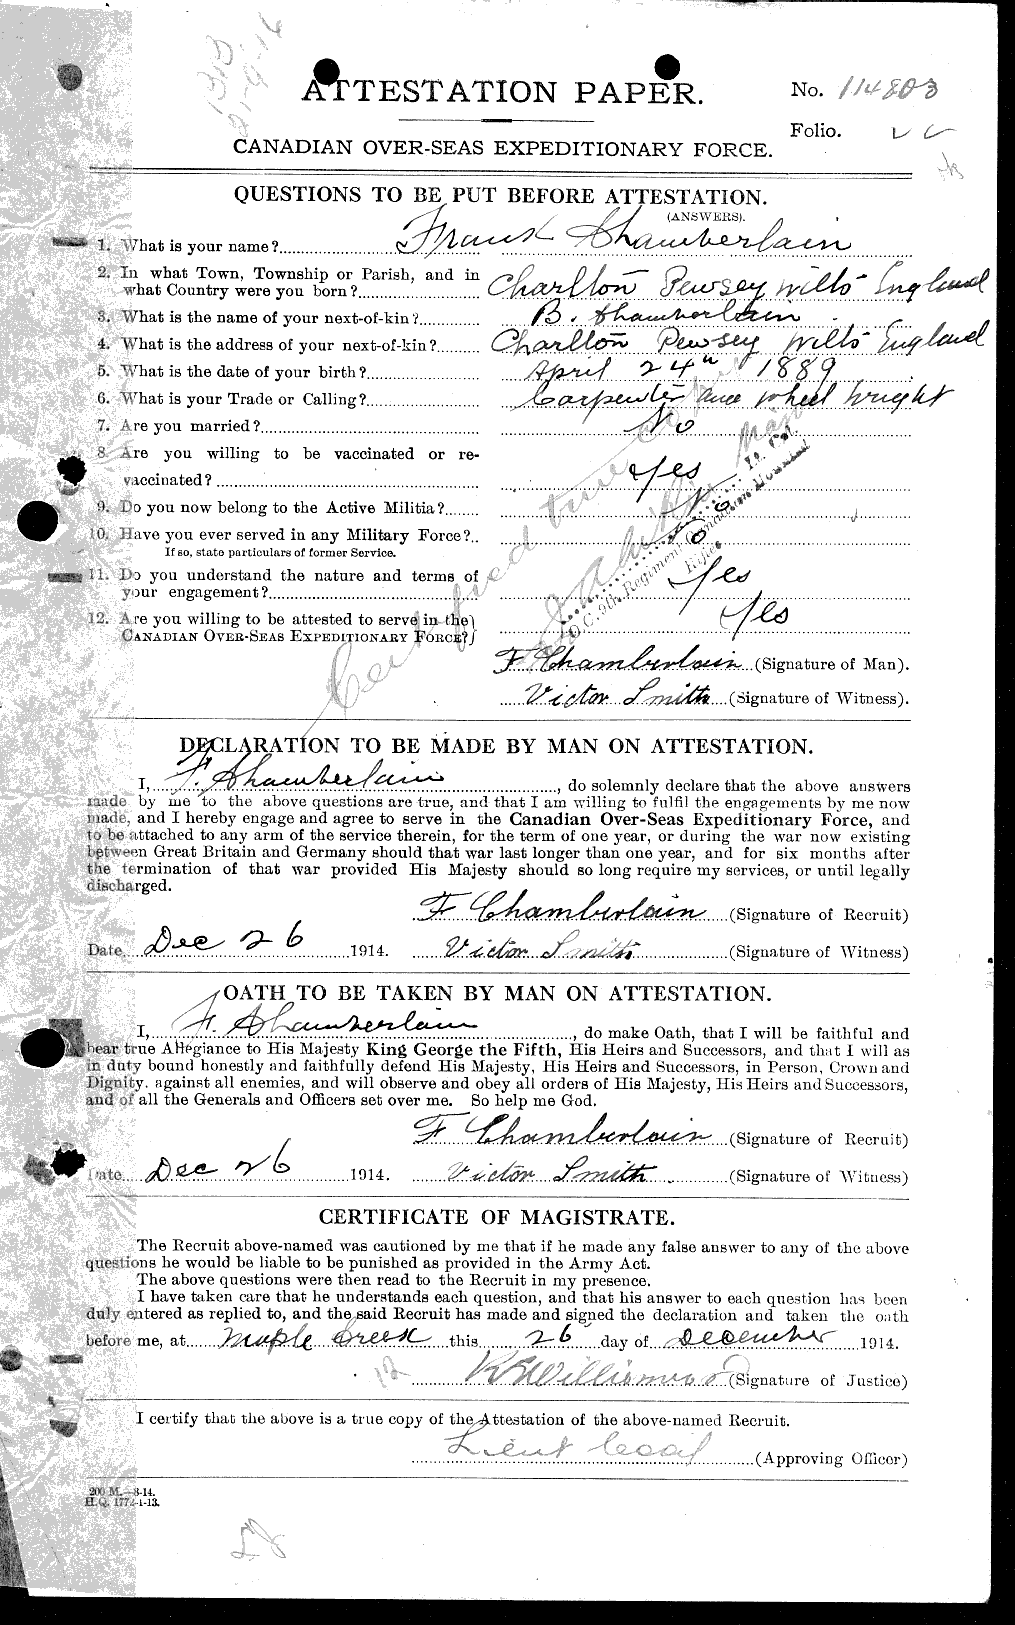 Personnel Records of the First World War - CEF 019551a